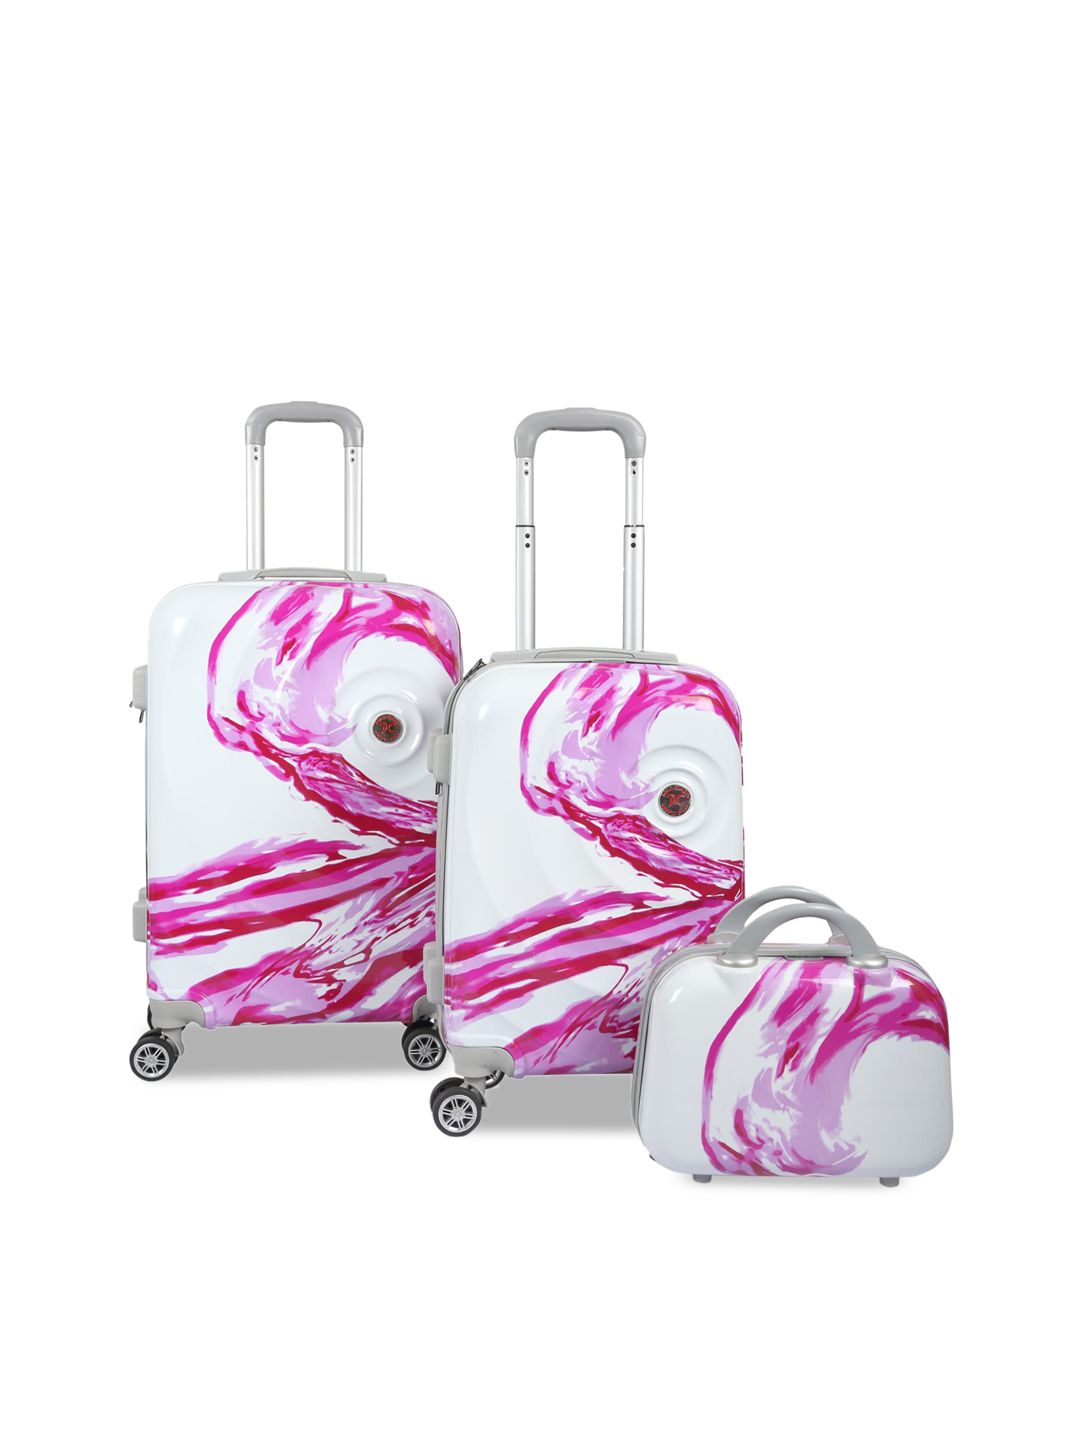 Polo Class Unisex Set Of 3 Pink & White Printed Trolley & Vanity Bags Price in India